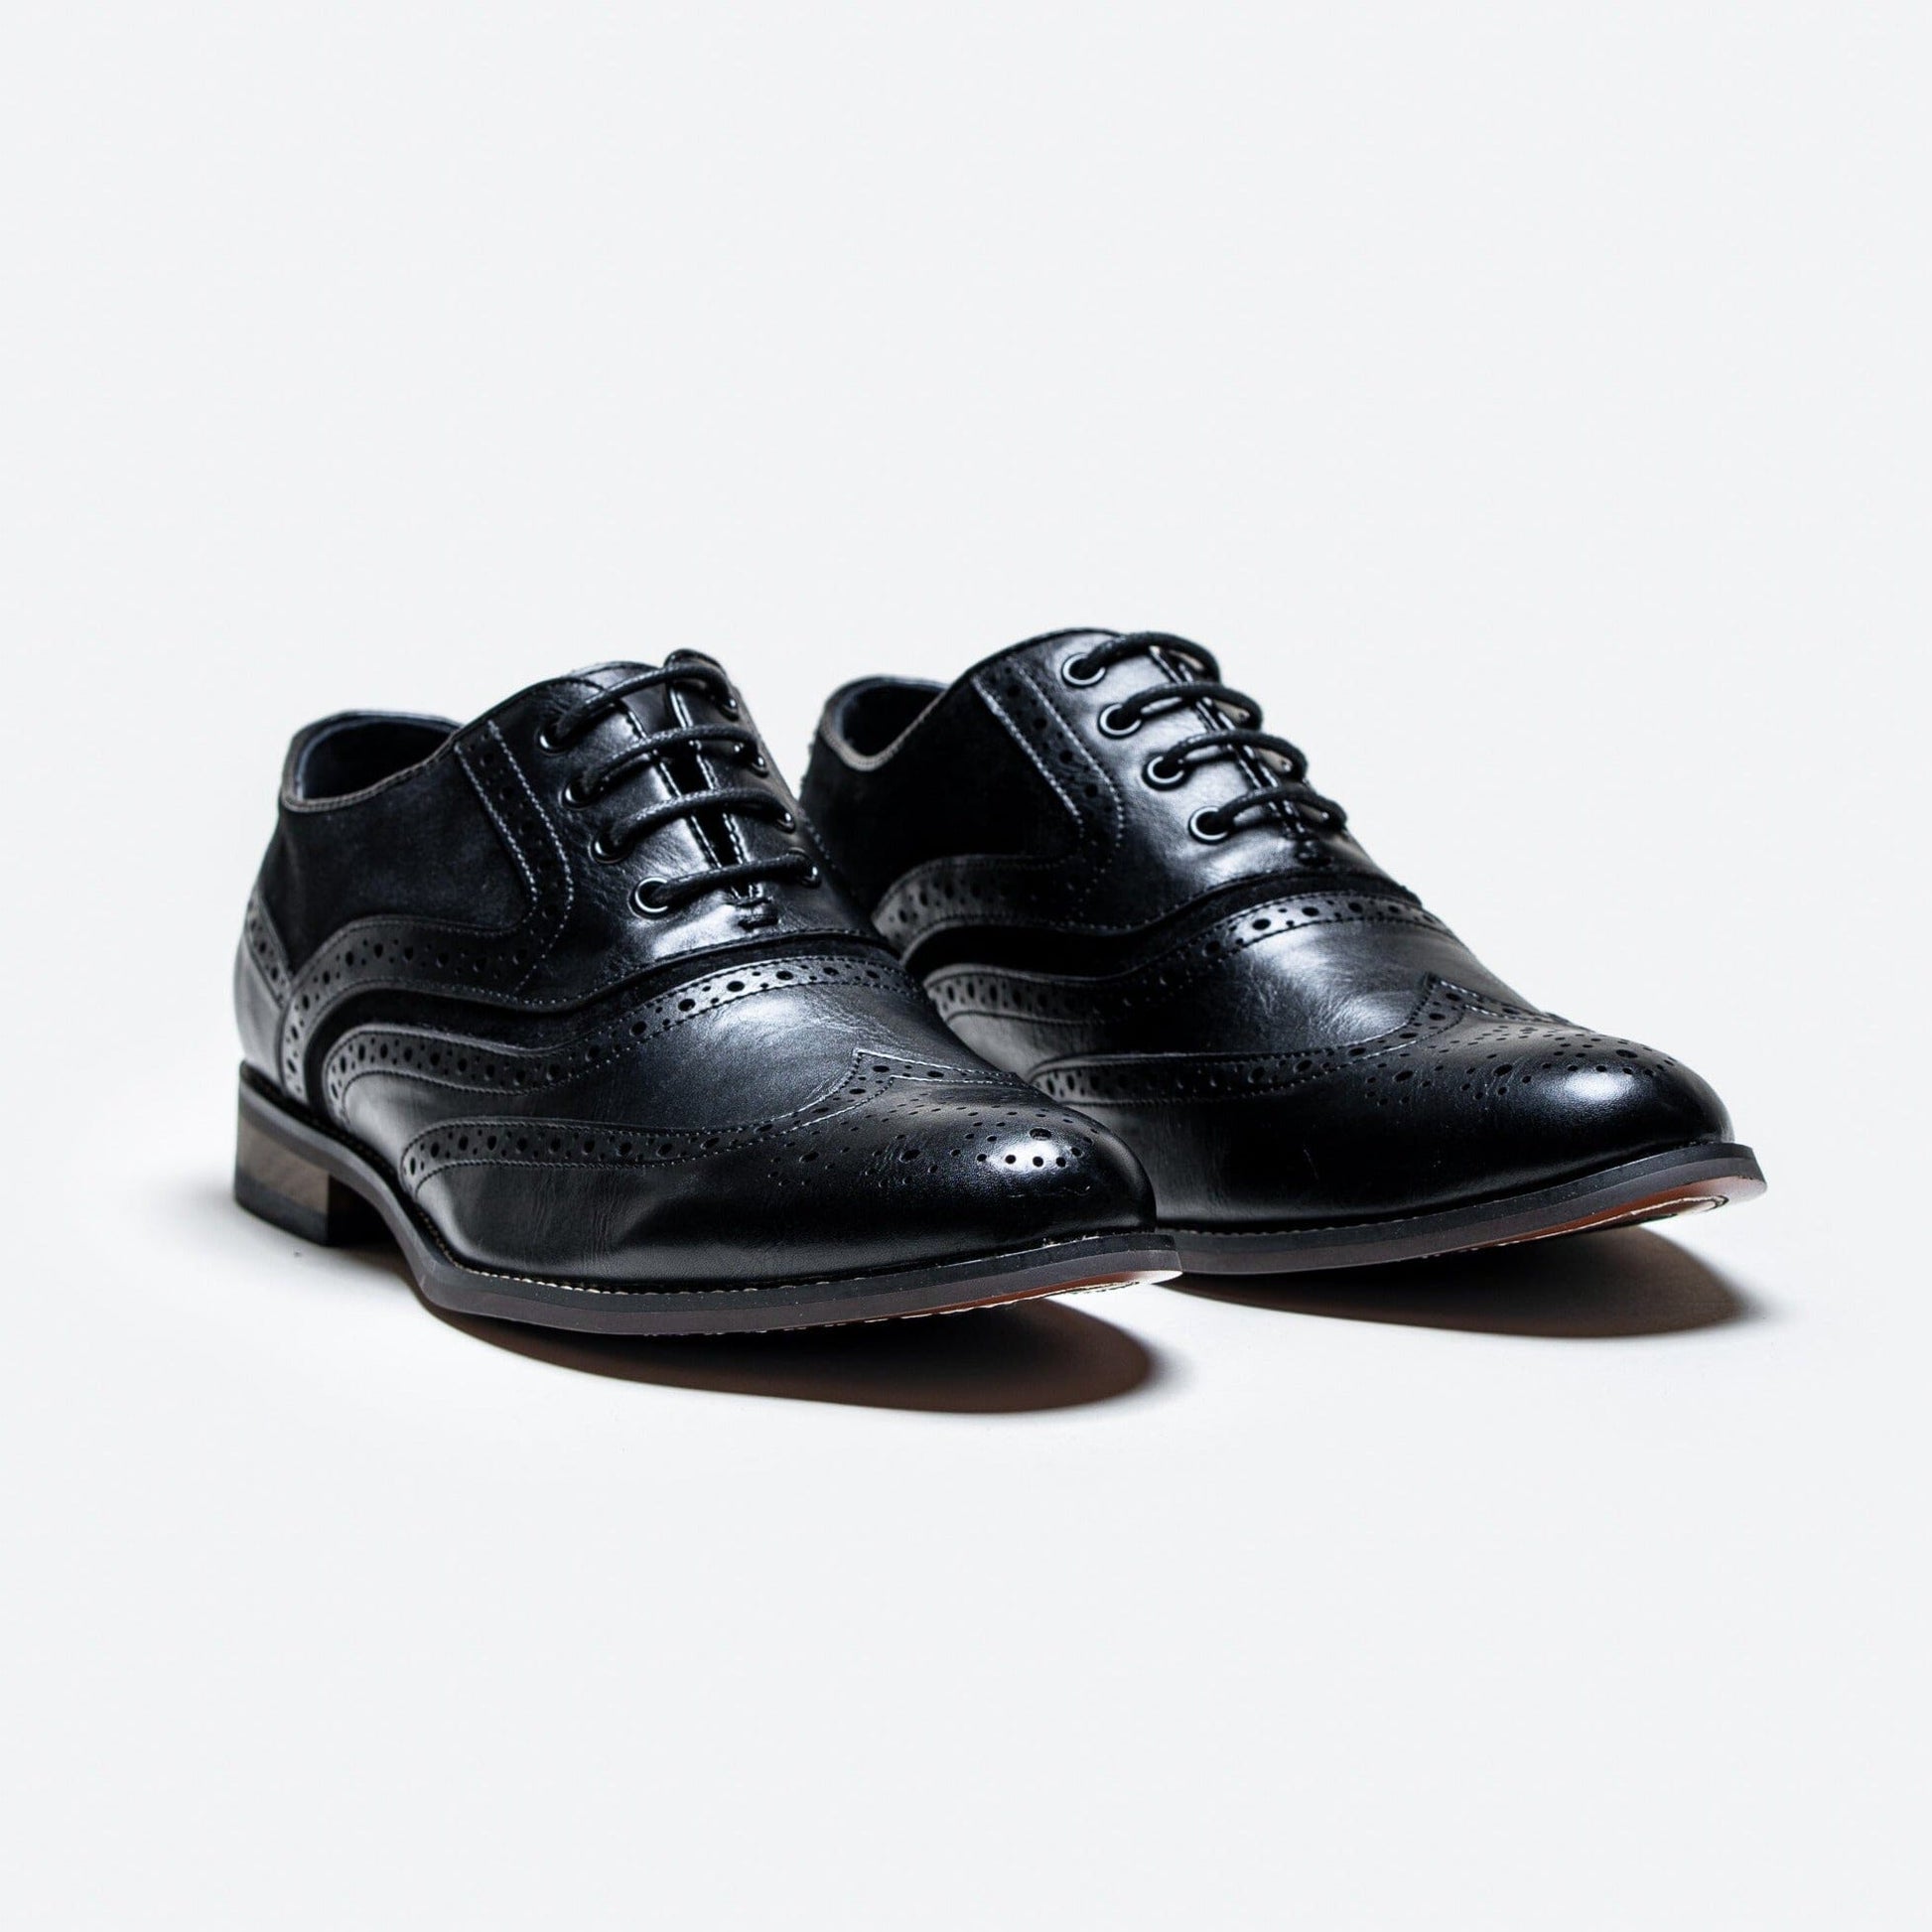 Russel Black Brogue Shoes - Shoes - - THREADPEPPER